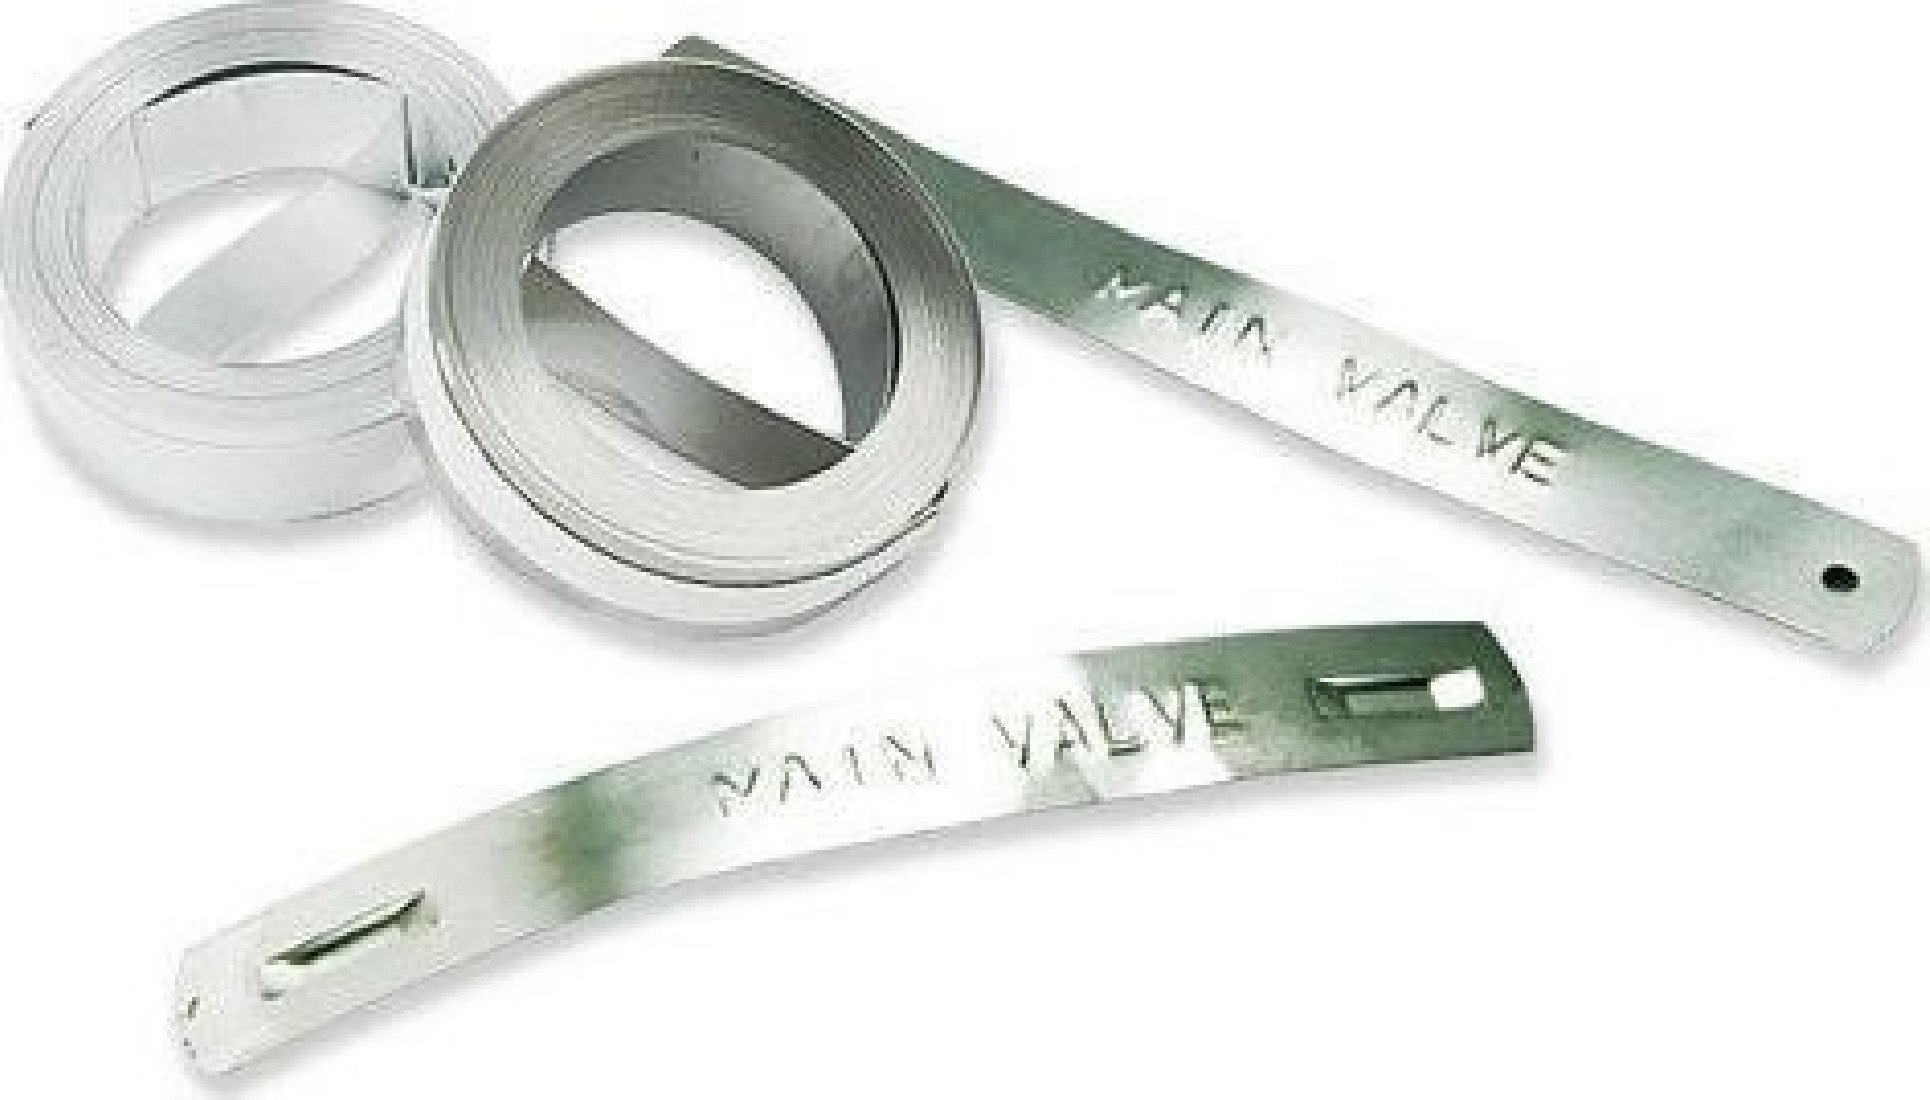 Dymo 35800 M11 tapes - aluminium with glue side 12mm x 3.65m, silver color